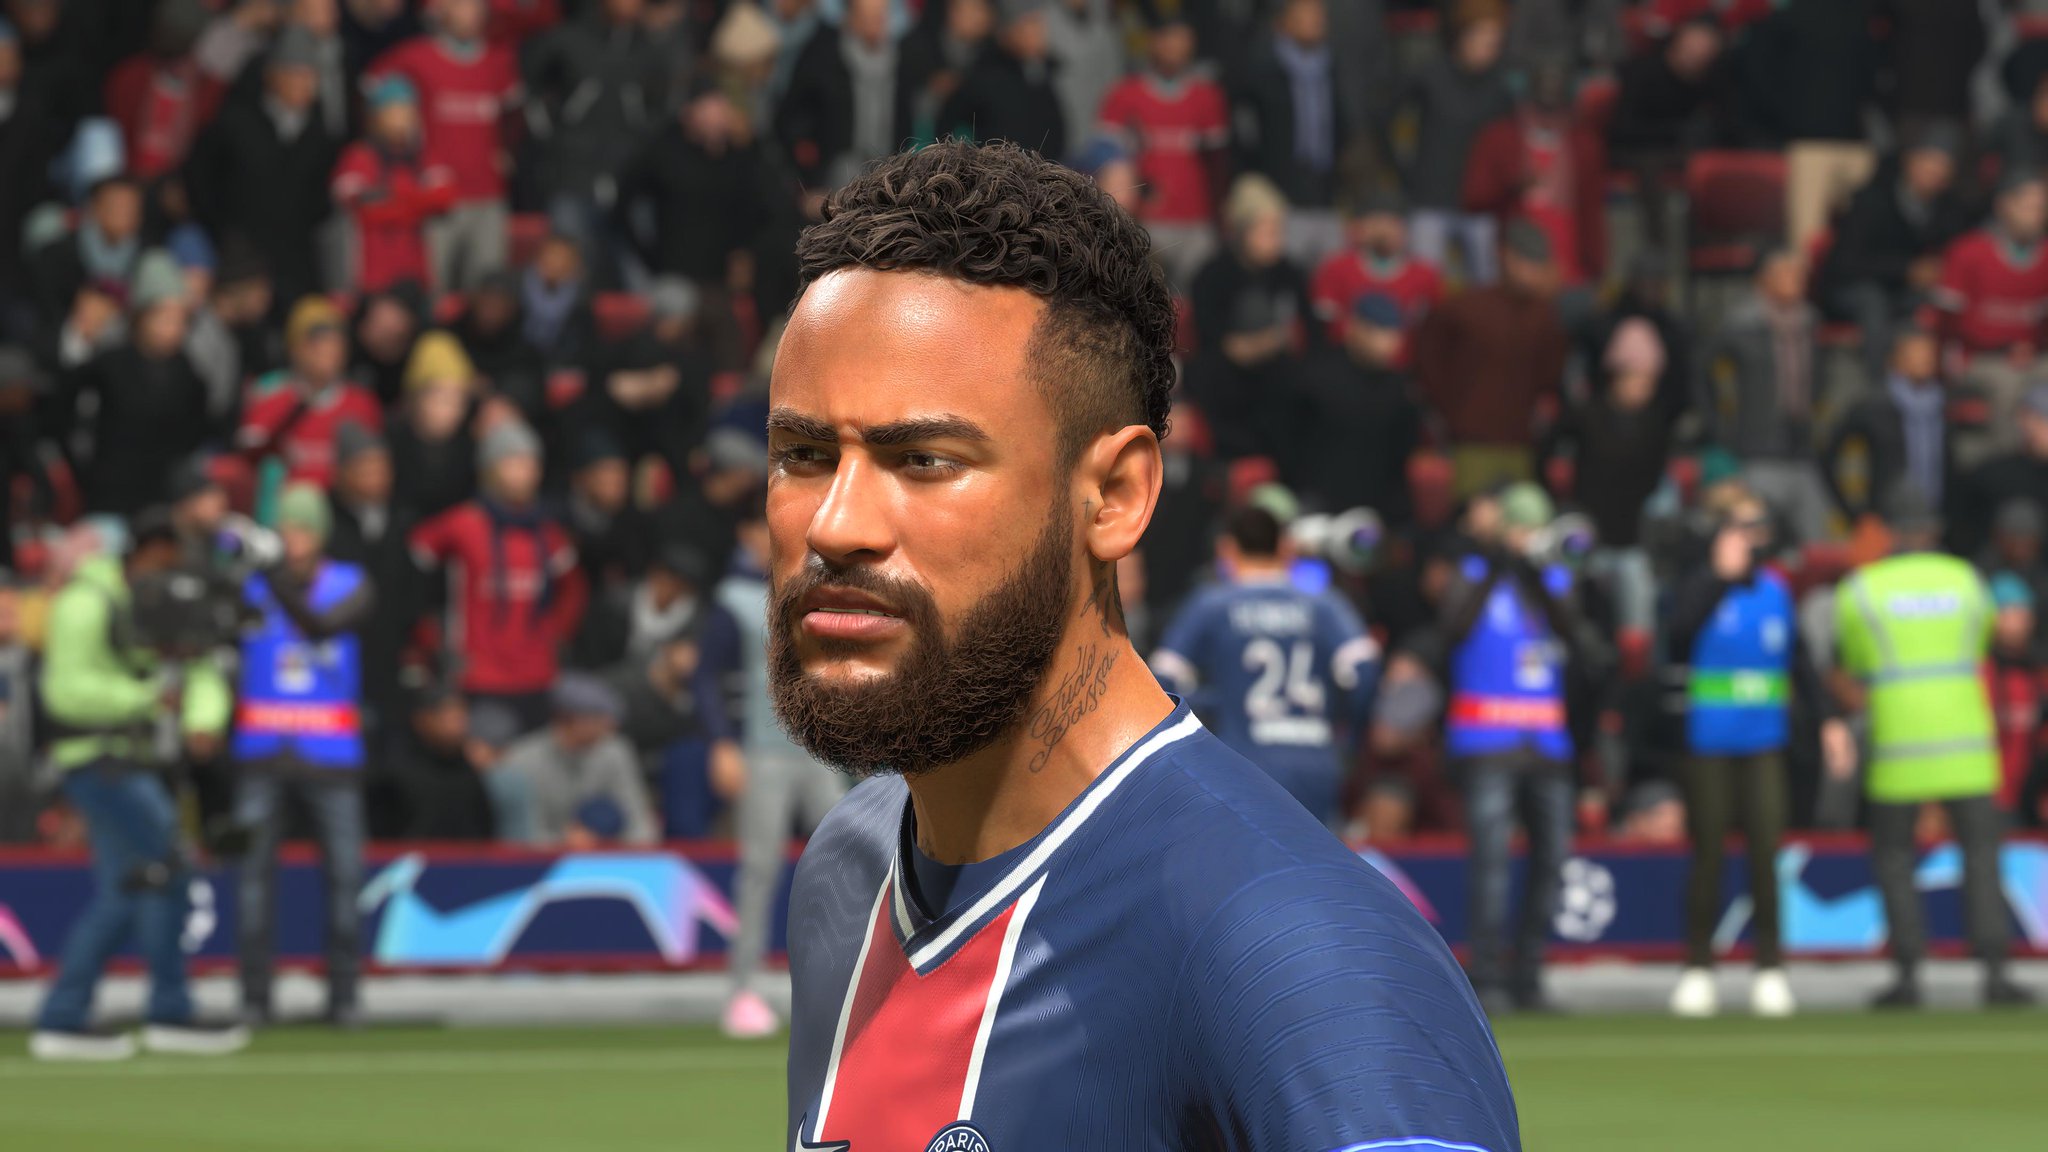 REVIEW FIFA 21 